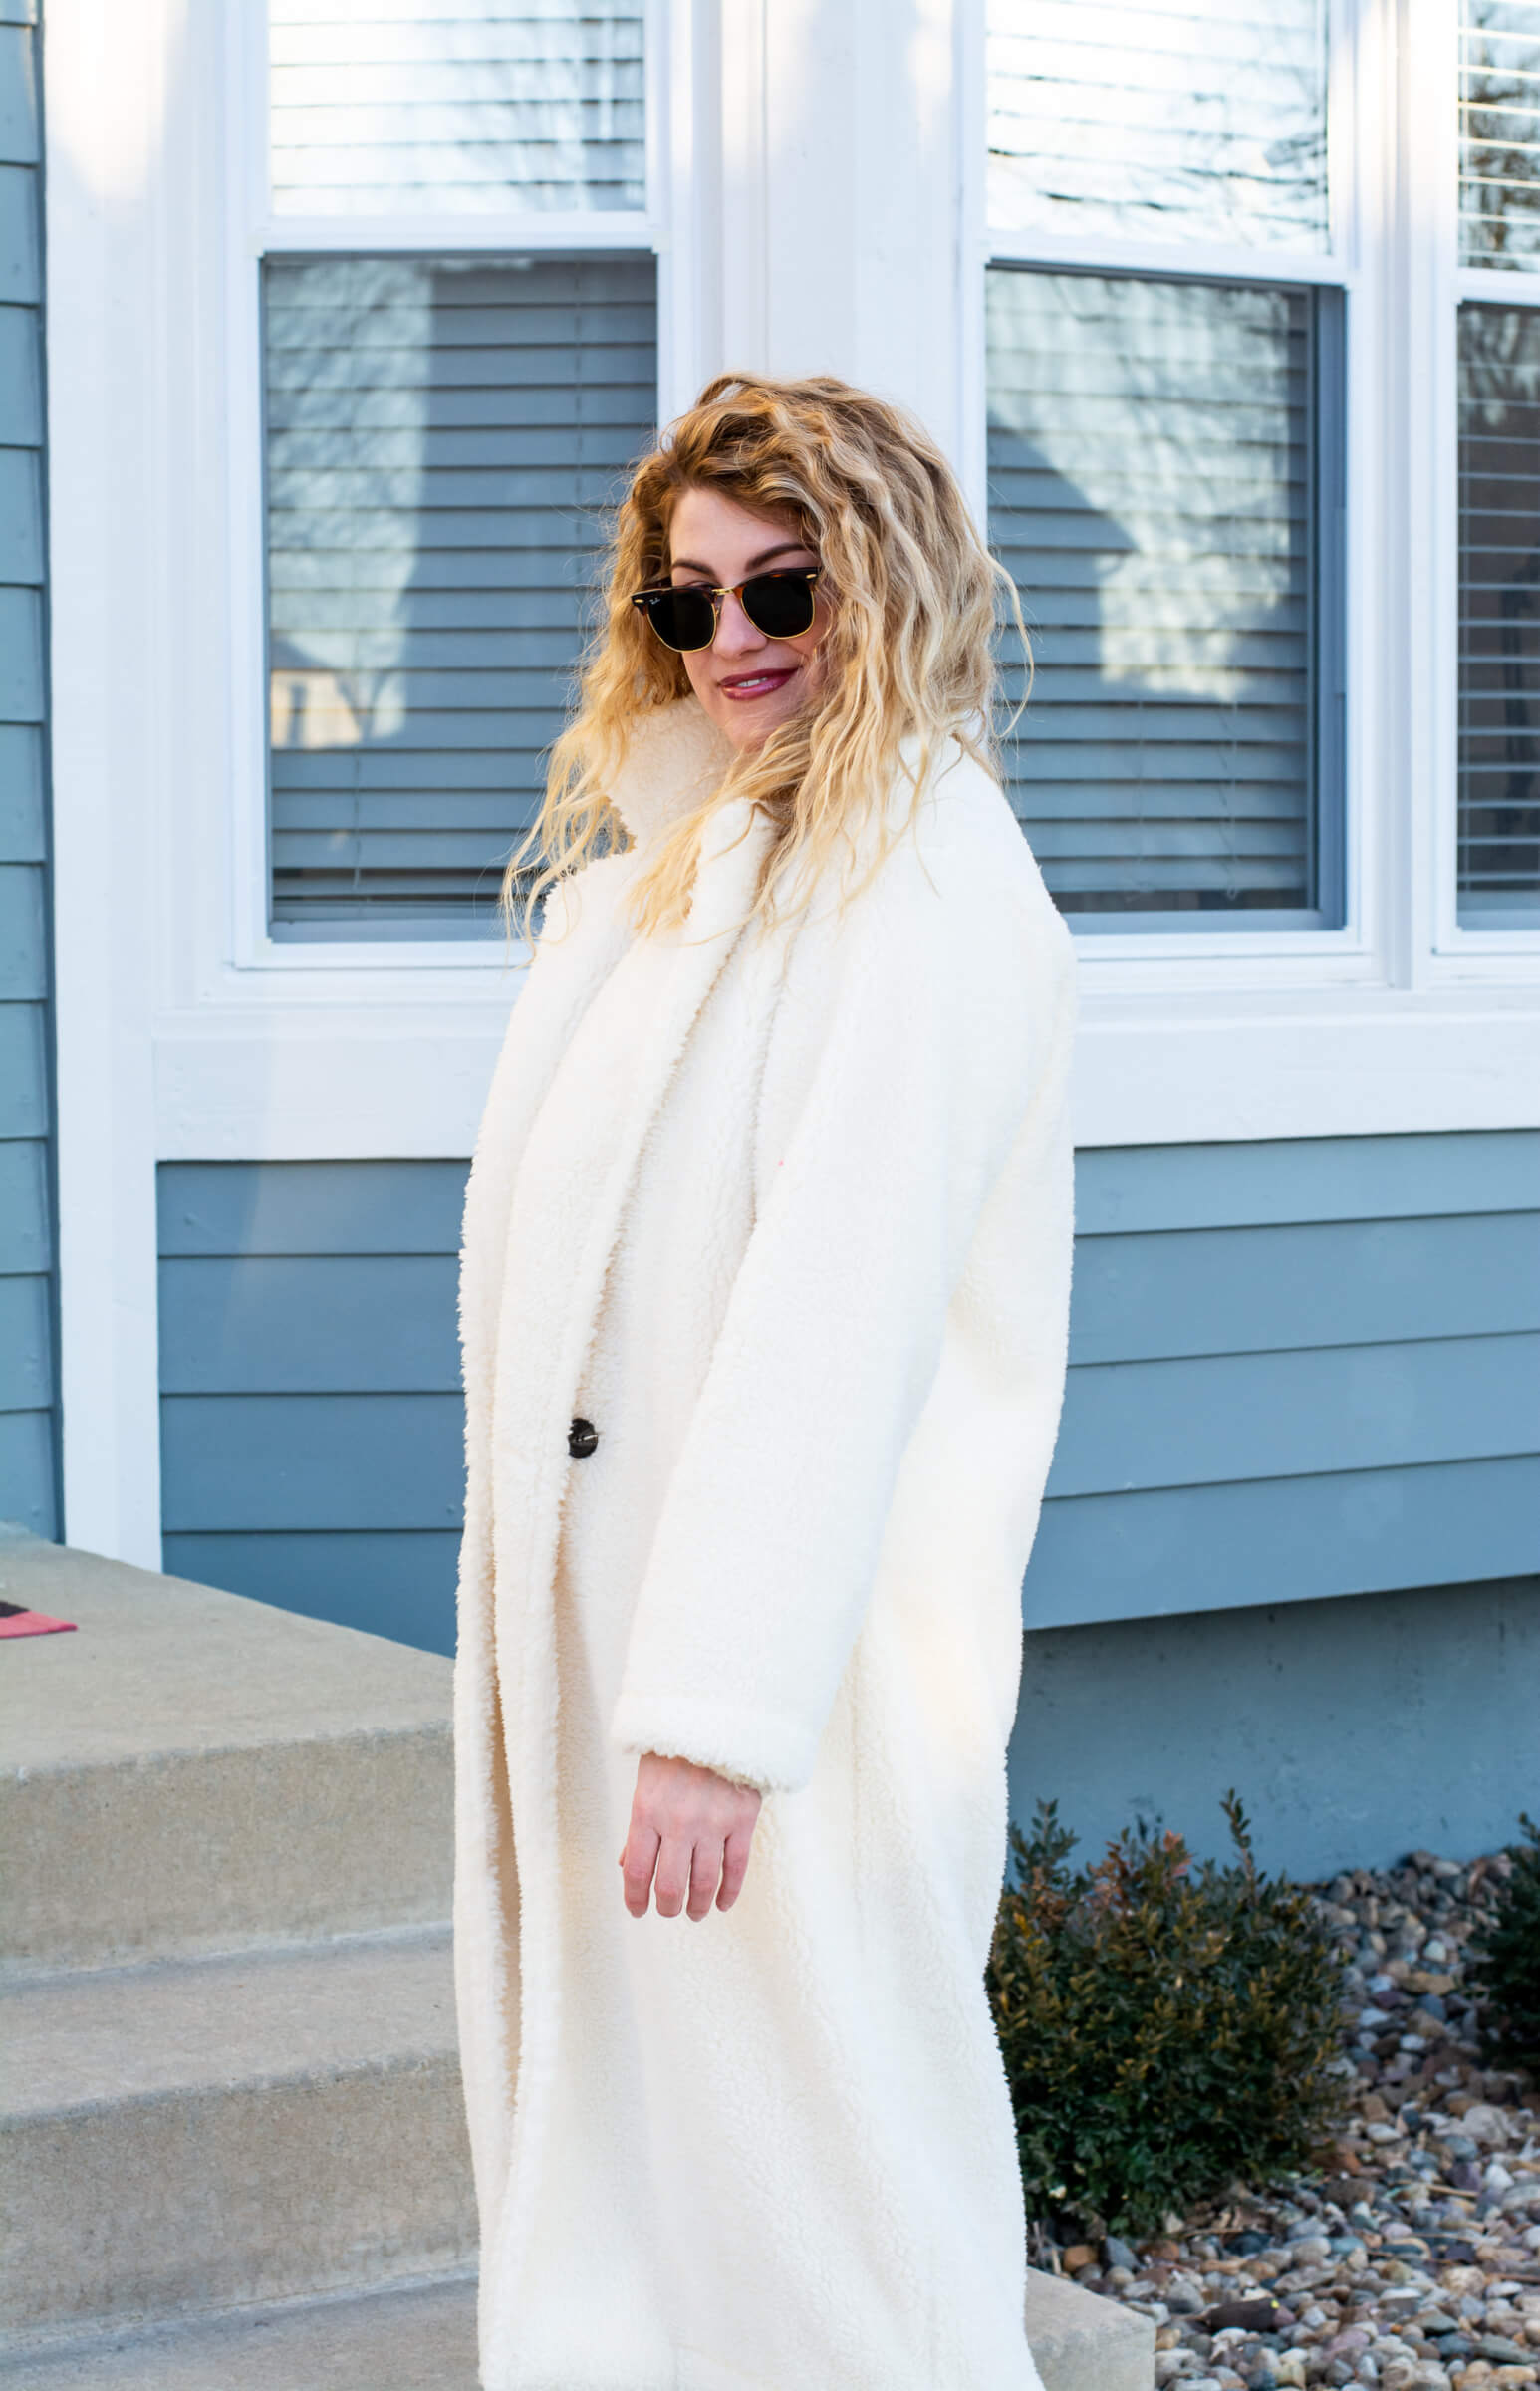 All-Winter White Outfit + Chunky Sneakers.